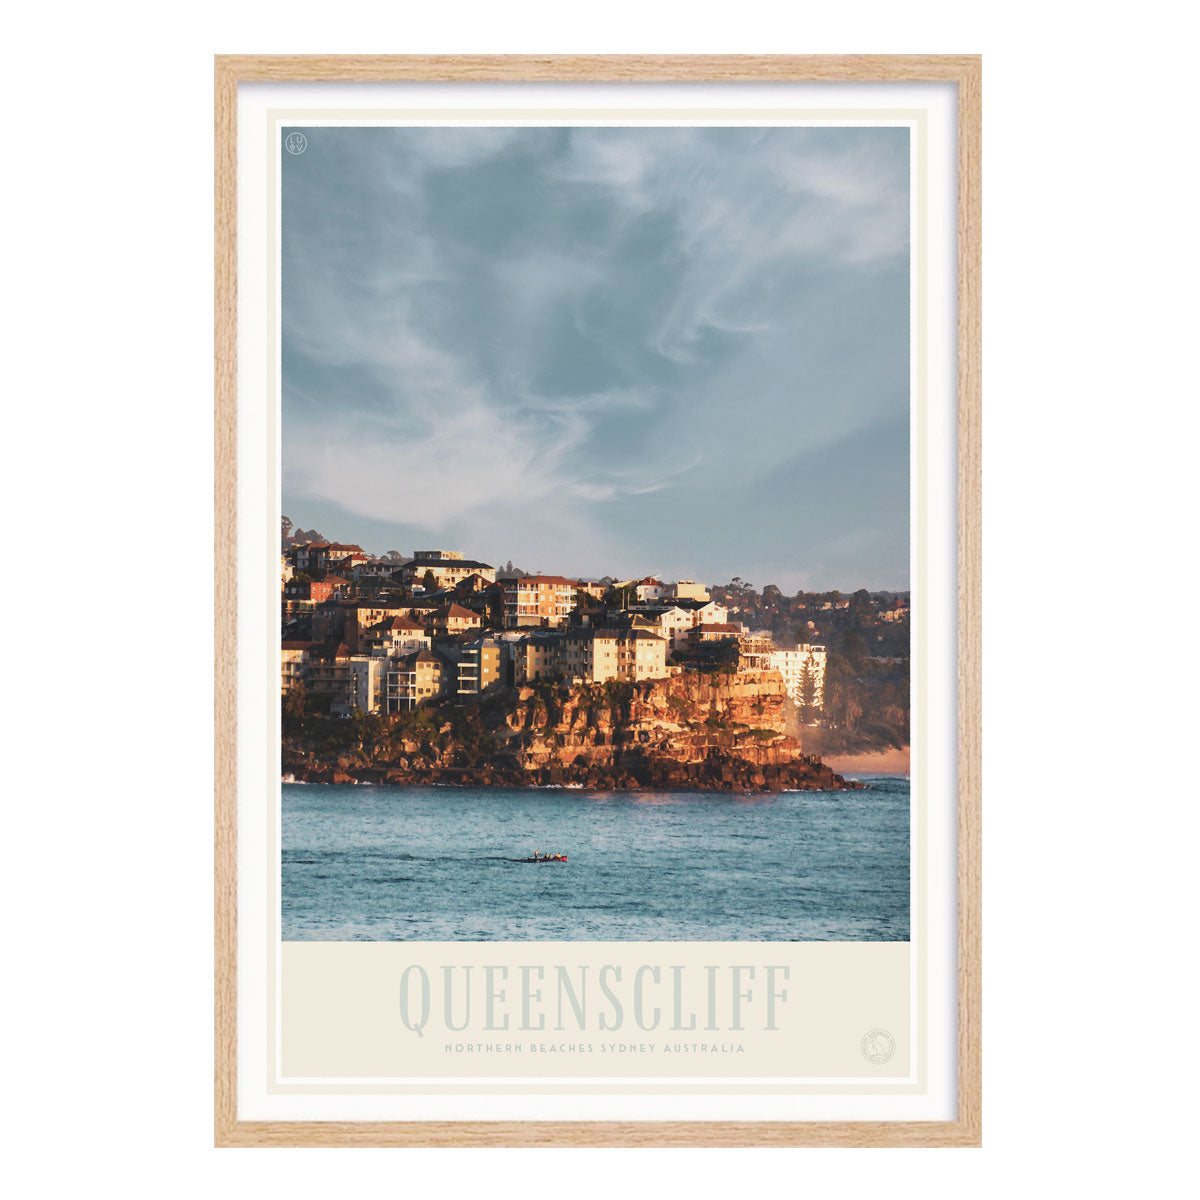 Queenslcliff Manly vintage retro poster print in oak frame from Places We Luv